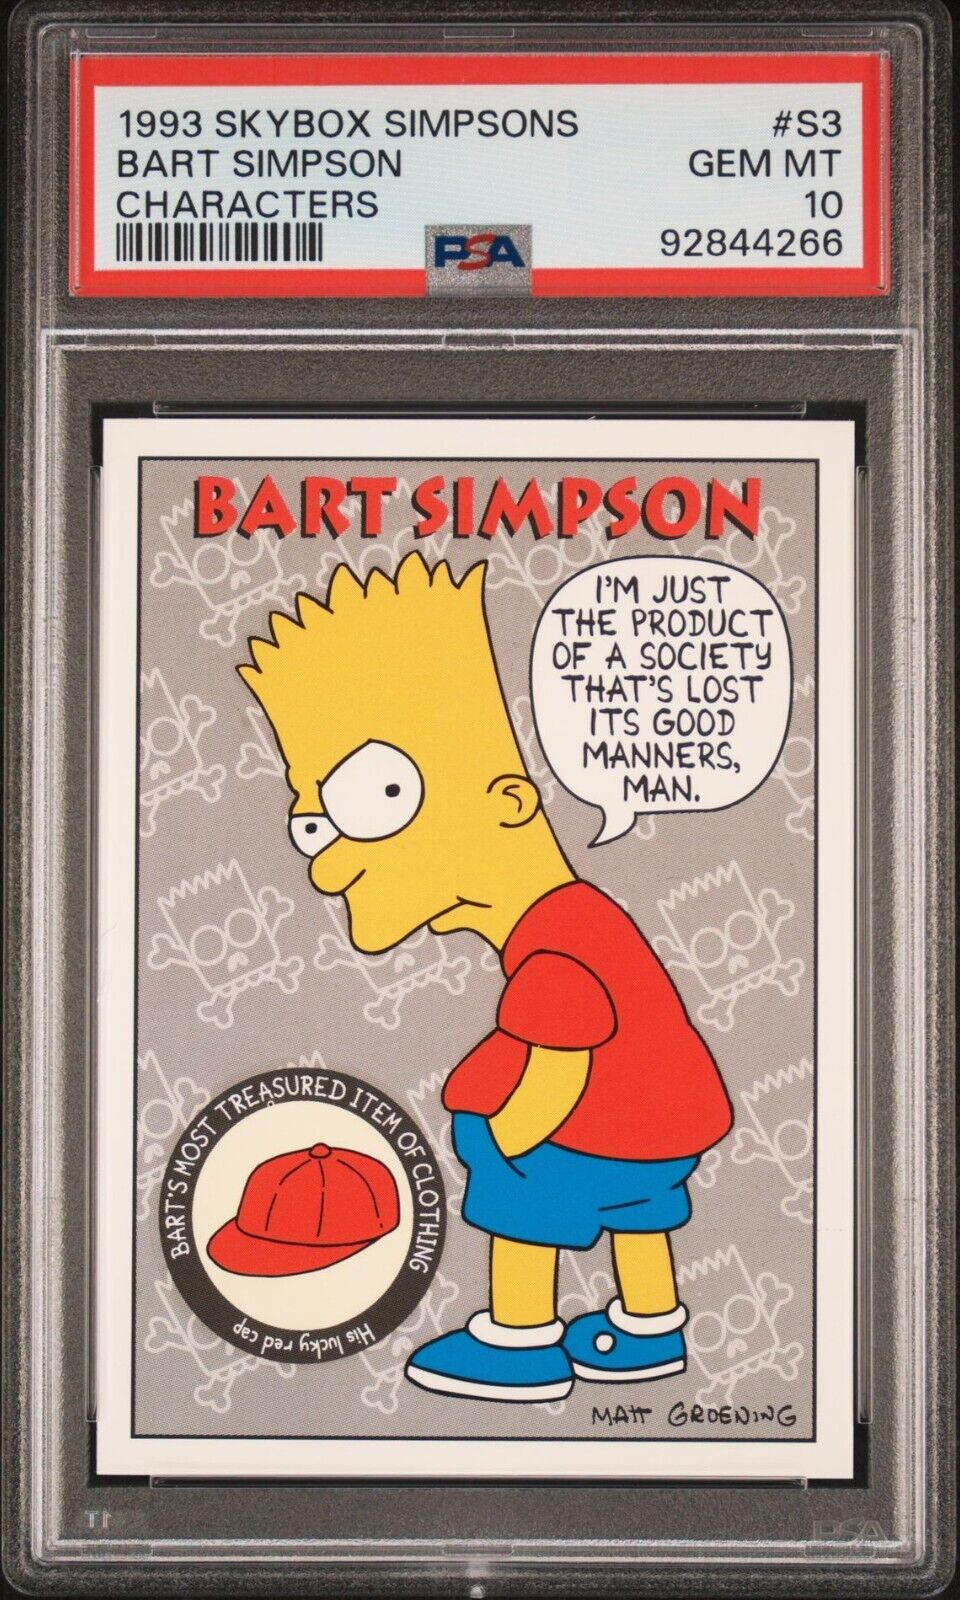 1993 Skybox Simpsons - Bart Simpson S3 Characters - First Character Card  PSA 10